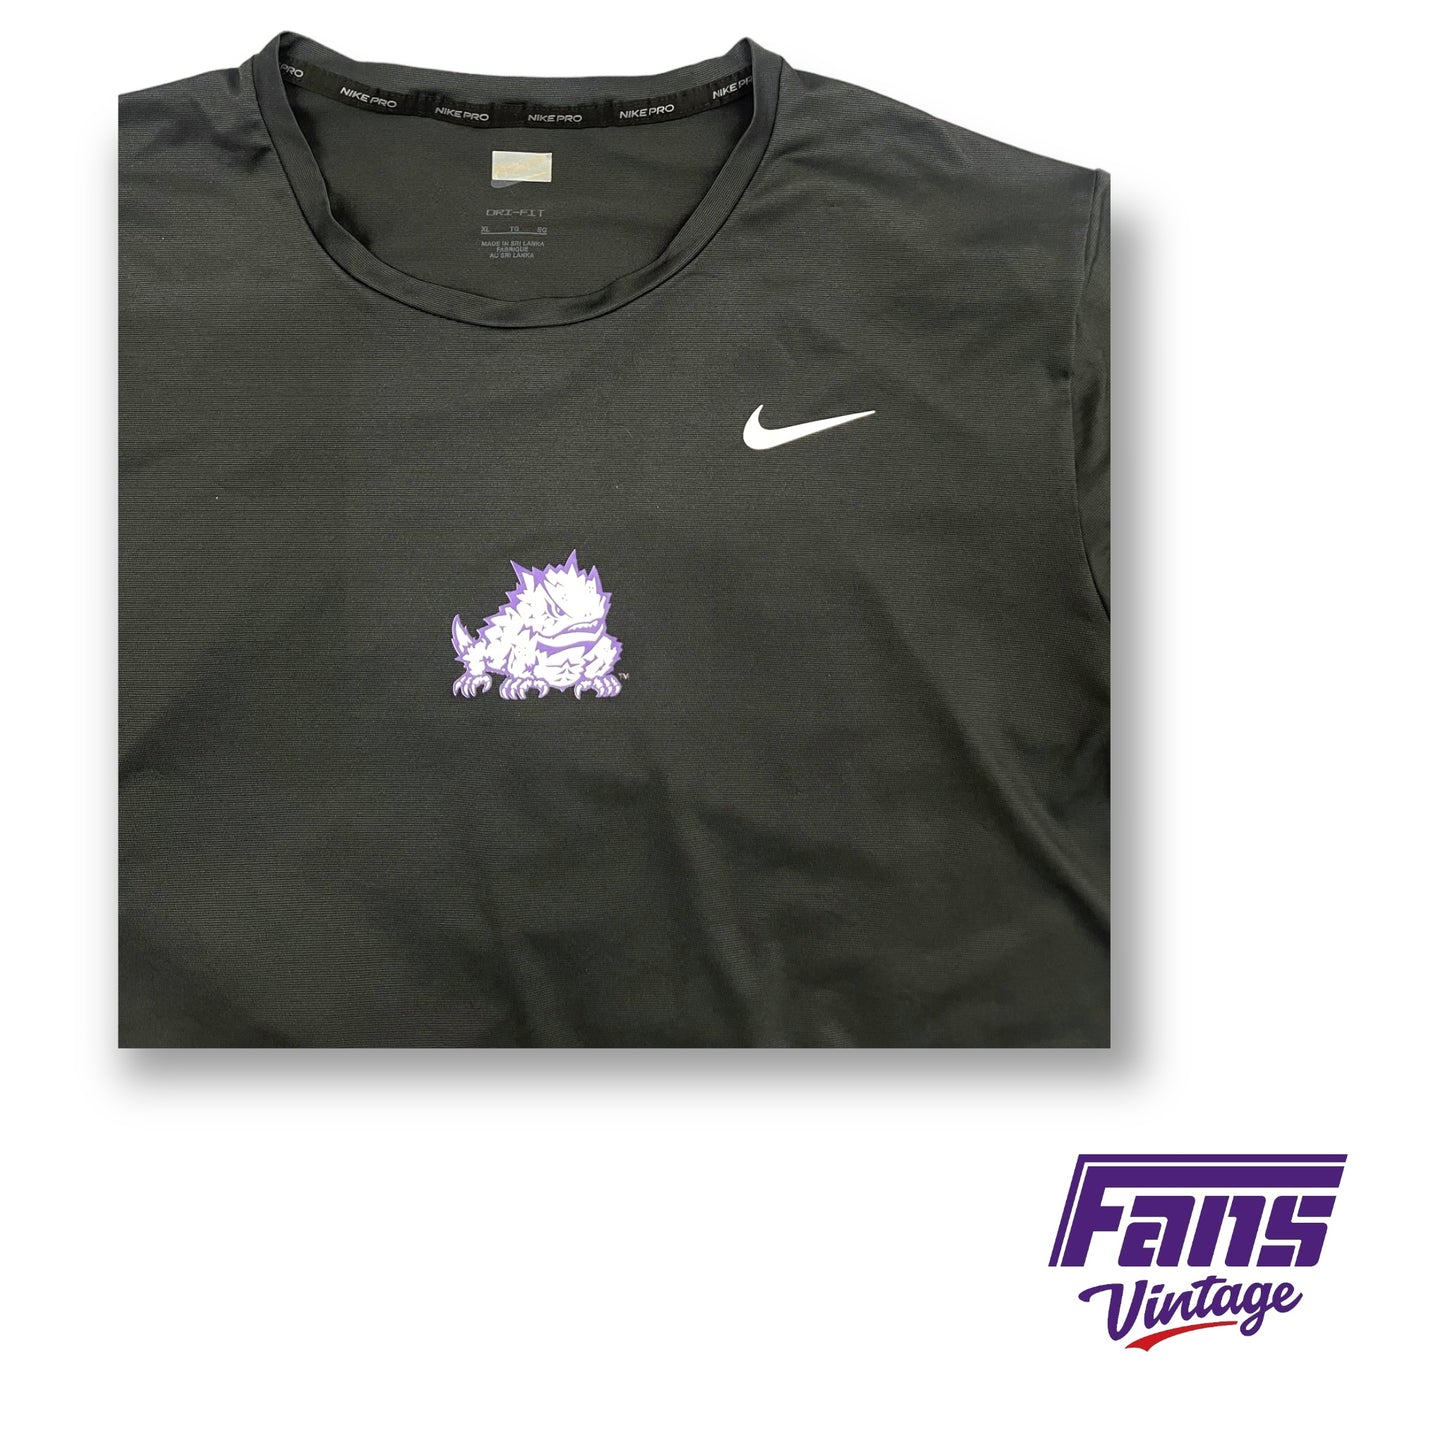 TCU Team Issue Nike Pro Horned Frog Anthracite Premium Workout Tee